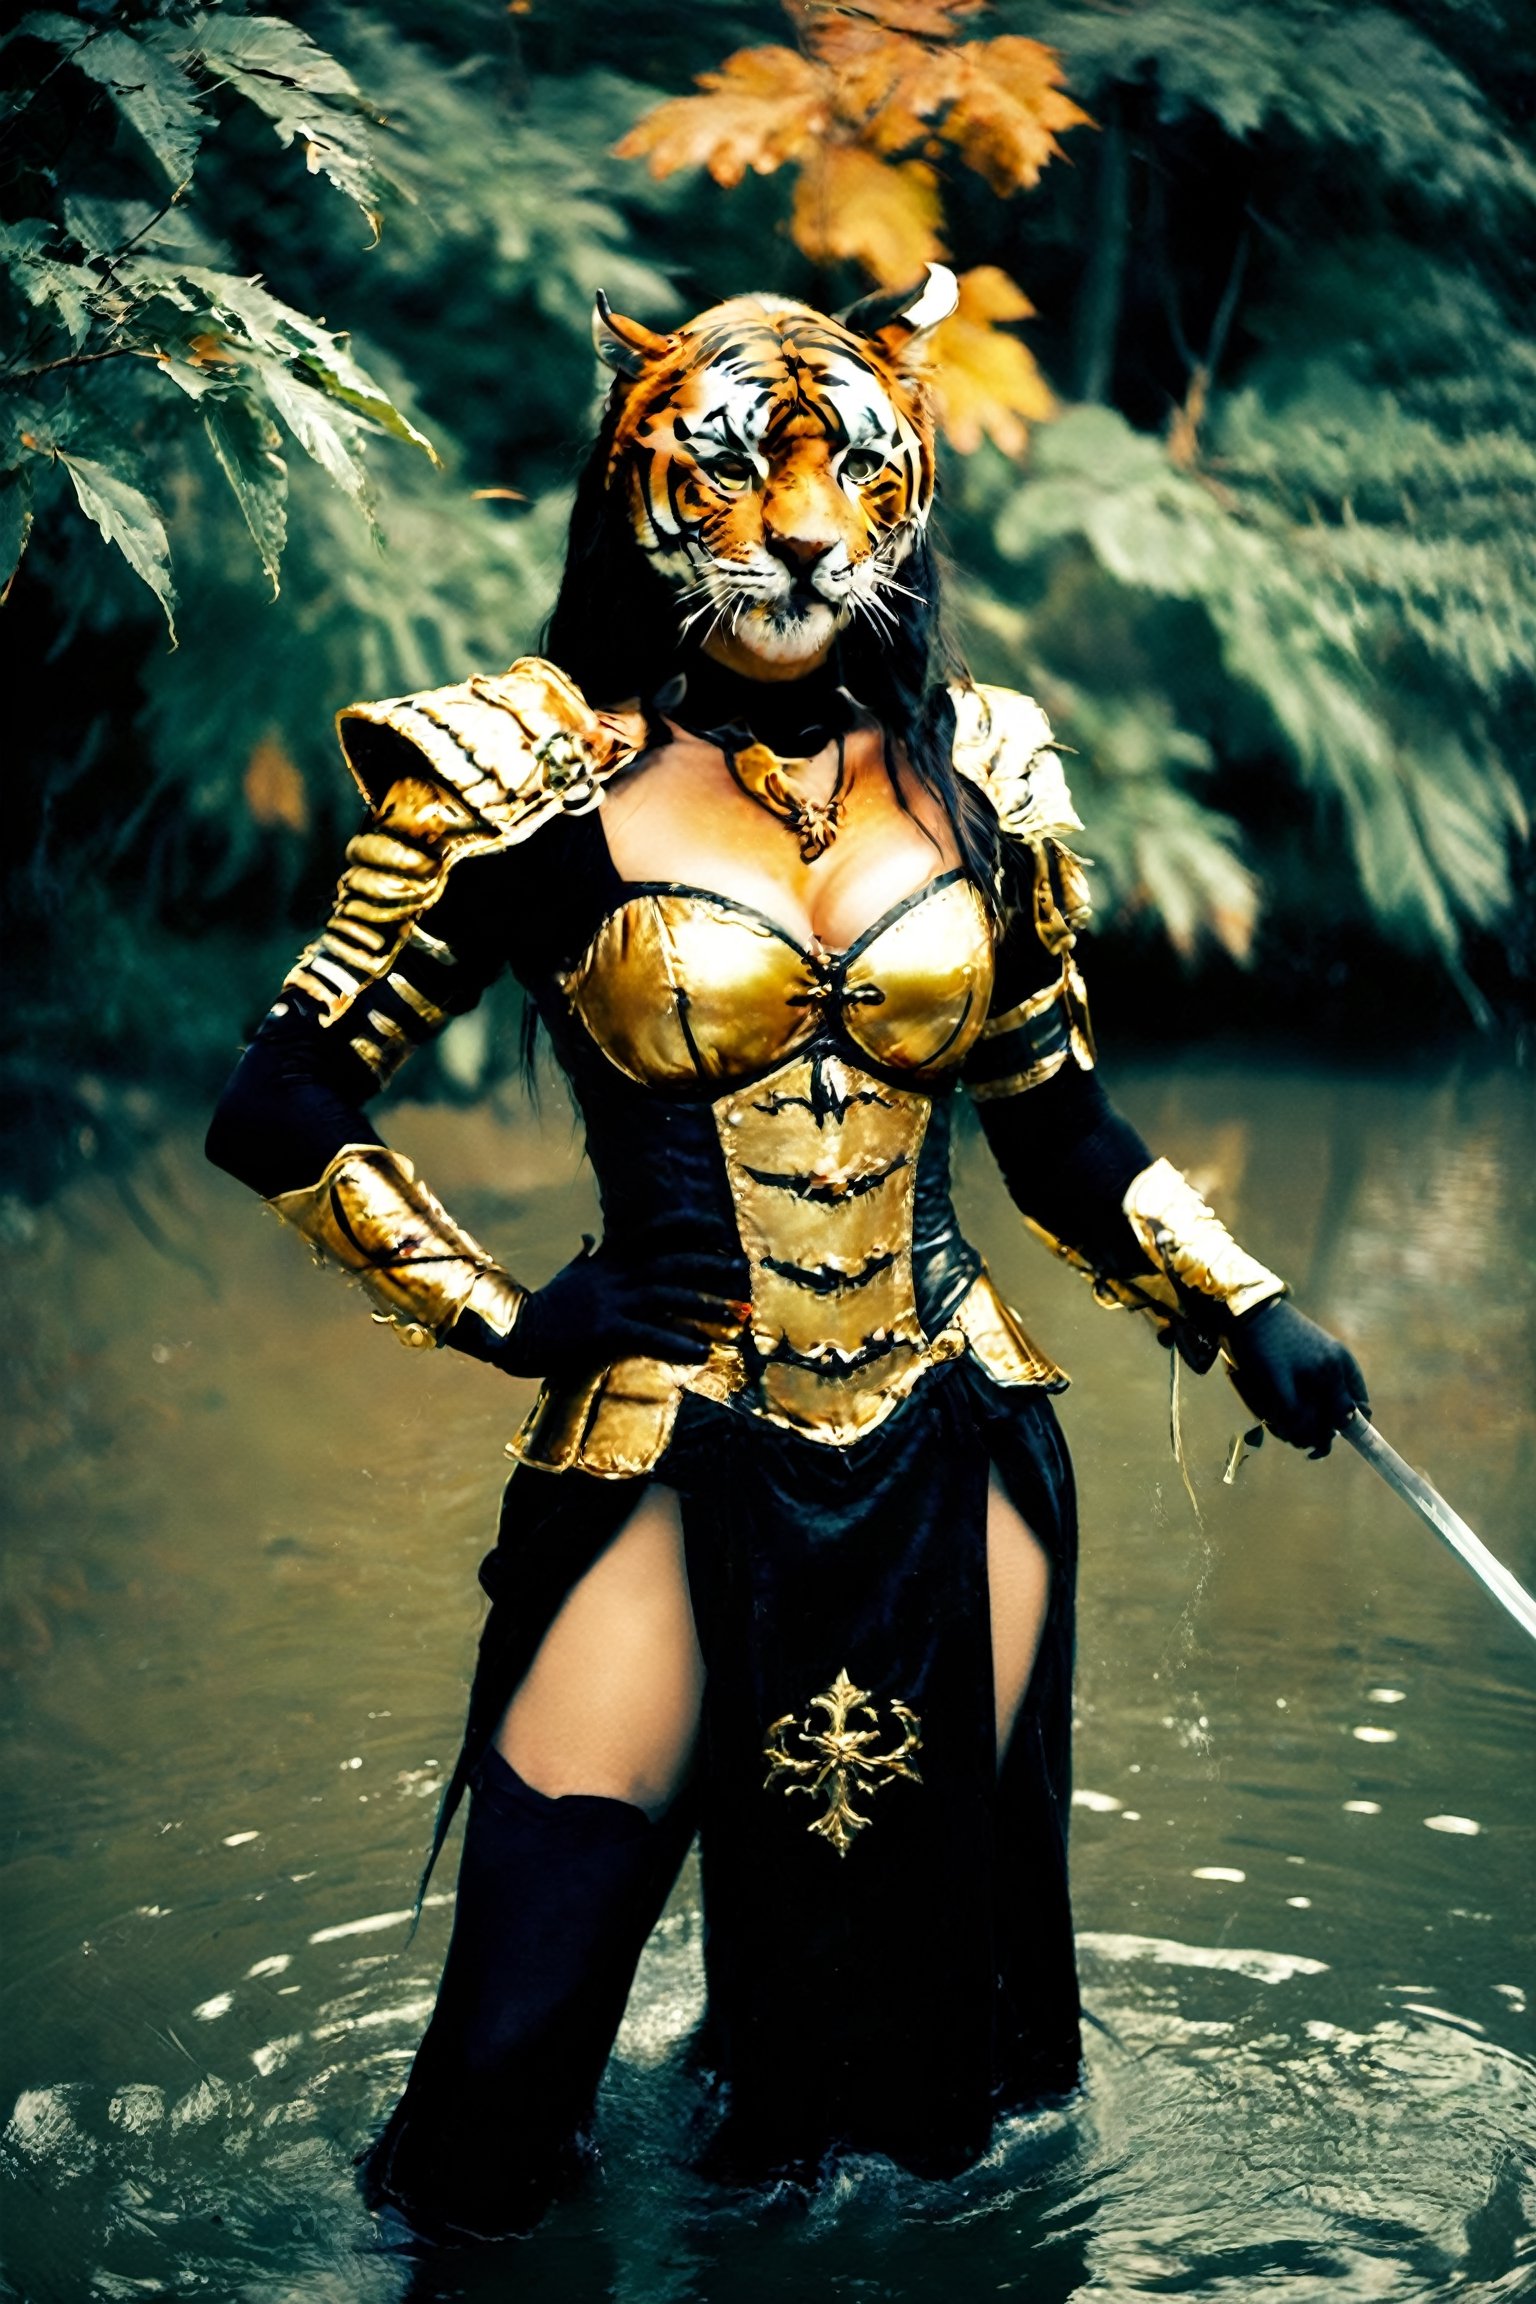 (masterpiece), photograph, (beautiful woman:1.1) wearing [Macedonian|Medieval] warrior suit, fighting stance, in tiger makeup, foliage and lake, epic, fantasy, 🤡, Straps, Sunny, horizon-centered, Energetic, film grain, Fujifilm XT3, L USM, Cold Colors, quantum wavetracing,
,classroom background, fear ambience,horror, 4k, halloween, detailmaster2, DonMn1ghtm4reXL,aw0k halloween makeup